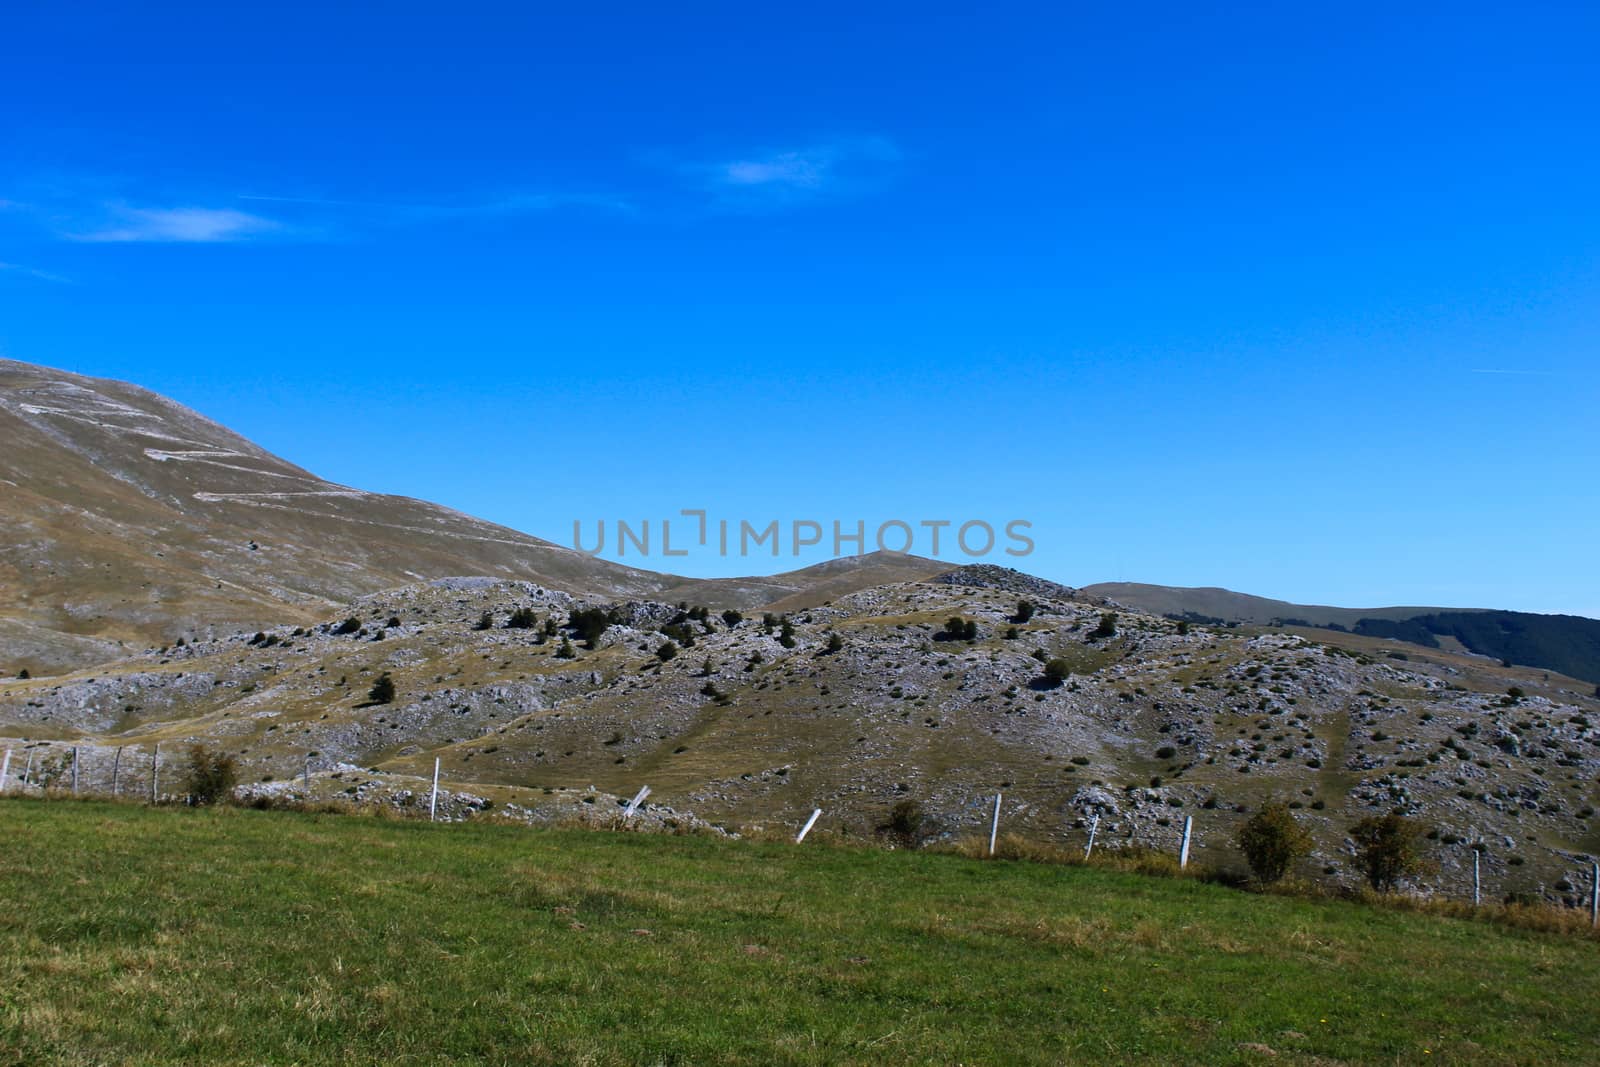 A meadow with a downed fence at the end of the meadow. In the background, mountain desolation, with little vegetation. On the way to the mountain Bjelasnica, Bosnia and Herzegovina.